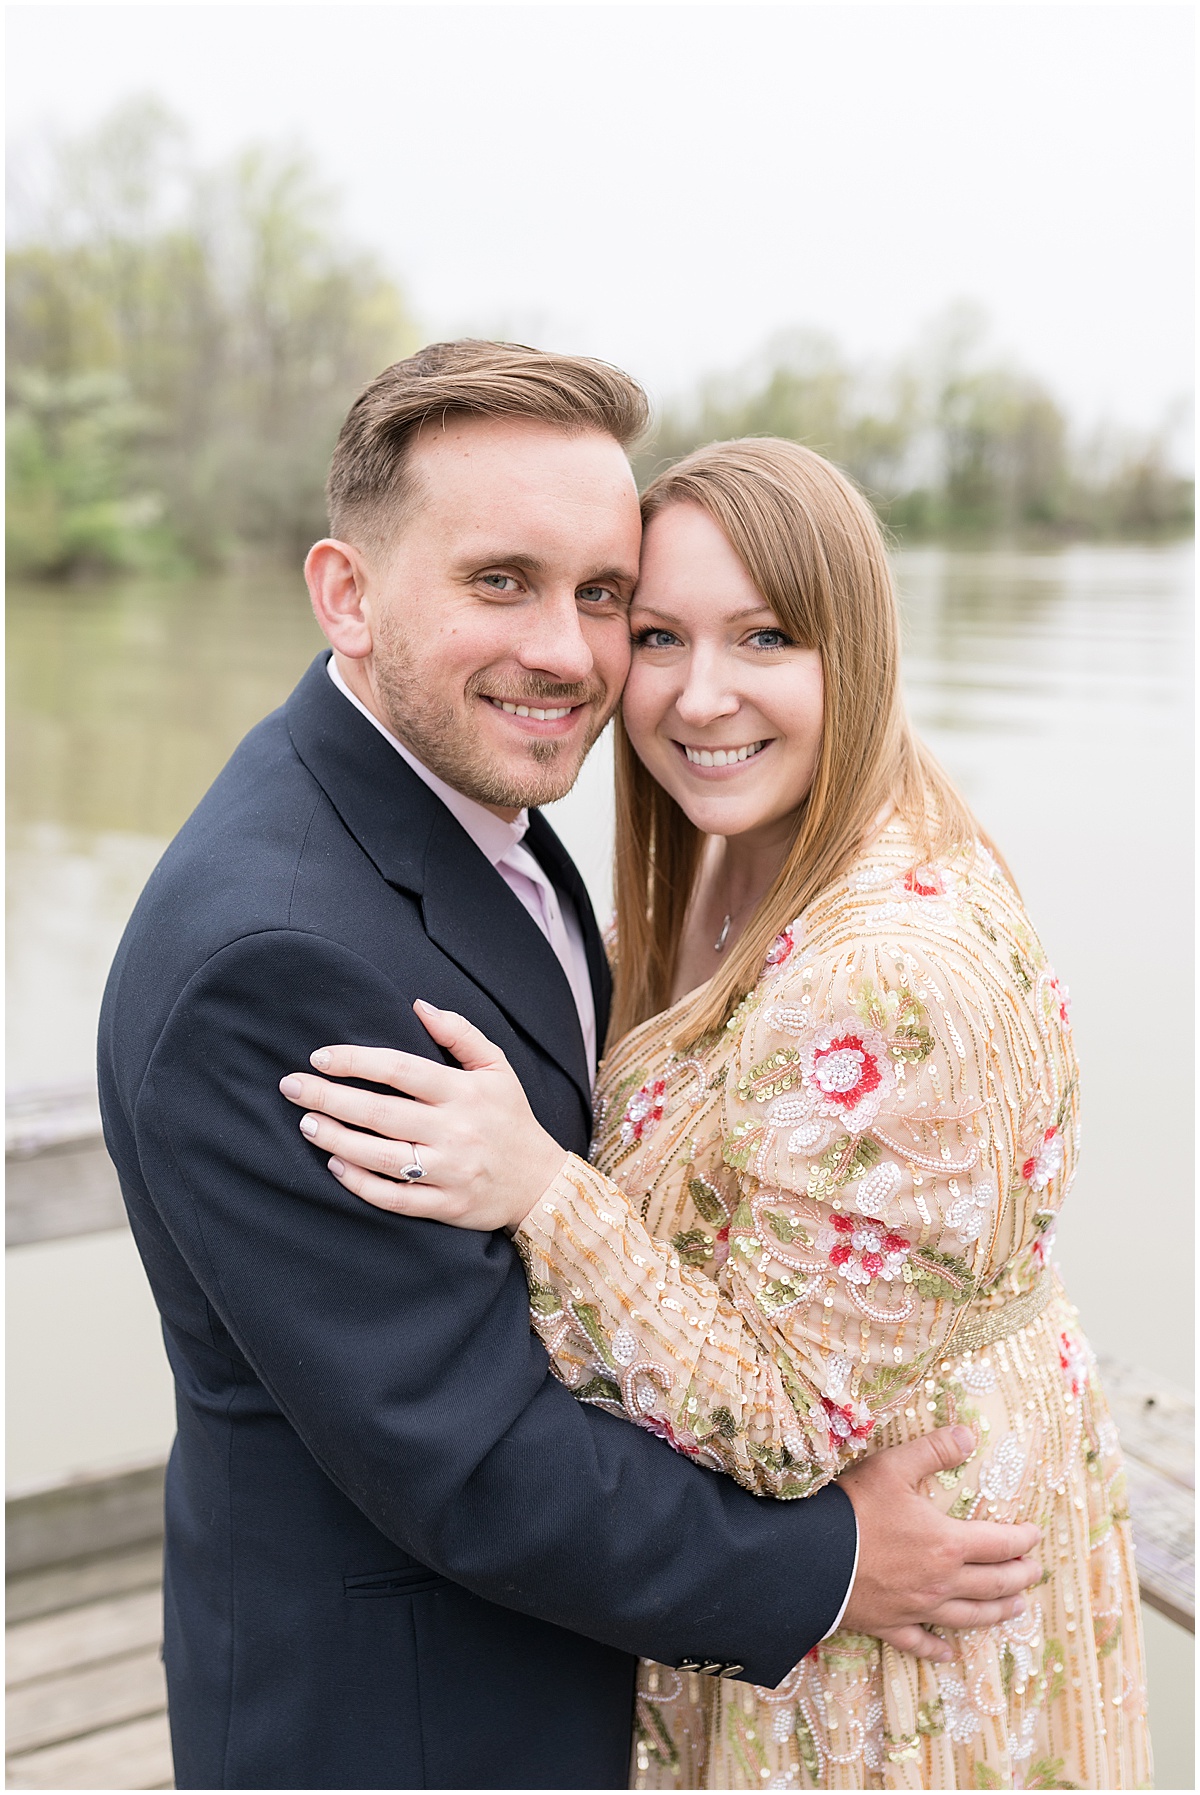 Couple by water during early spring engagement photos at Wildcat Creek Reservoir Park in Kokomo, Indiana